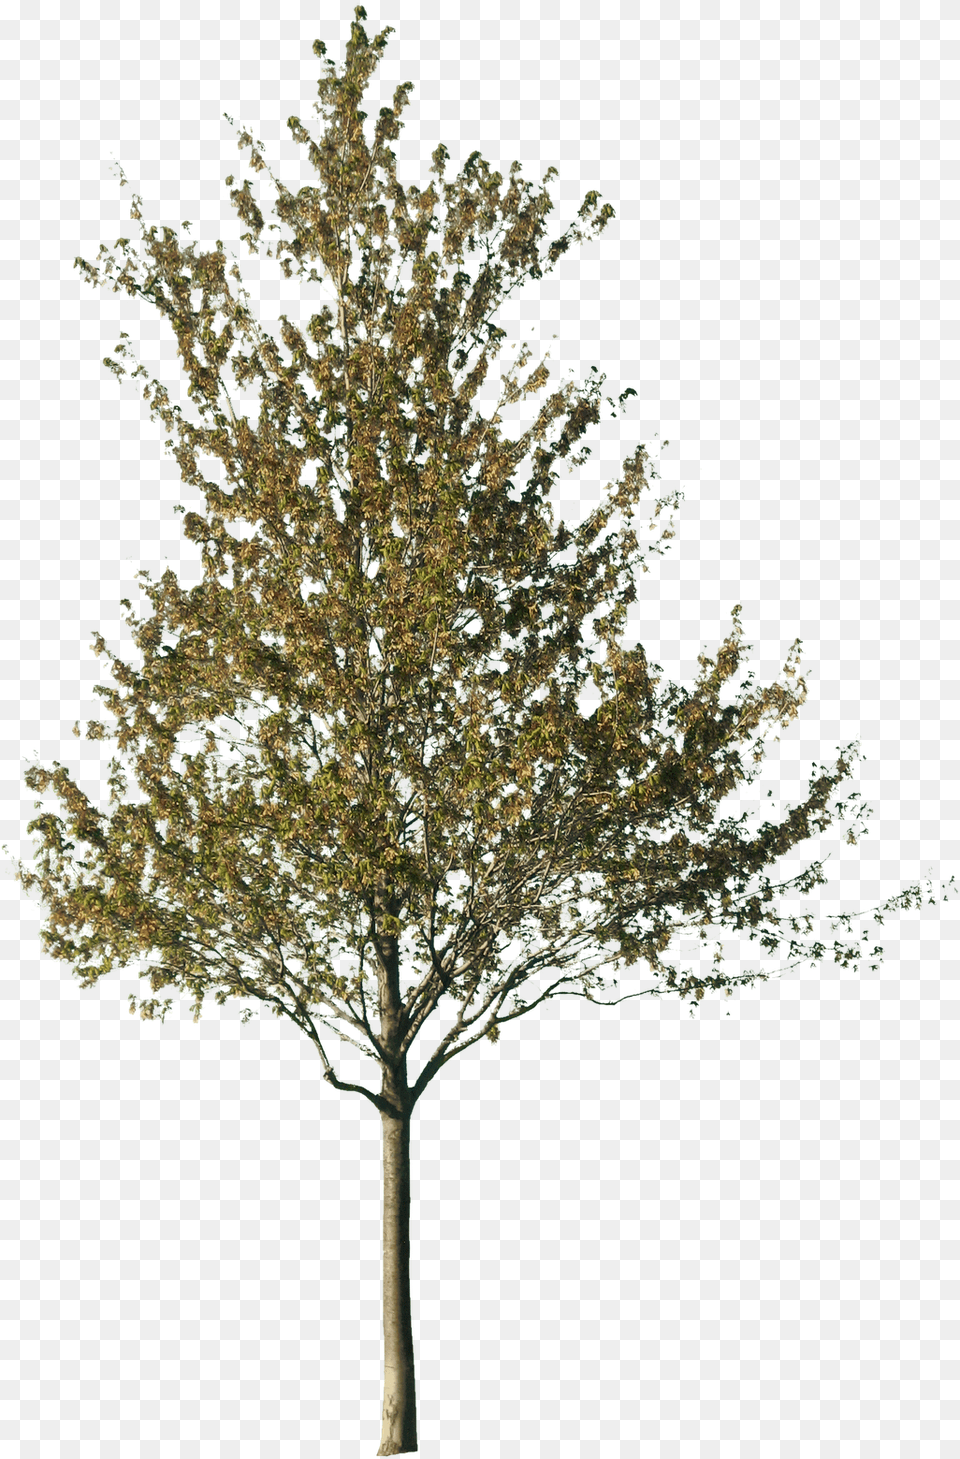 Cut Out Trees Transparent U0026 Clipart Free Download Ywd Tree Cut Out, Oak, Plant, Sycamore, Maple Png